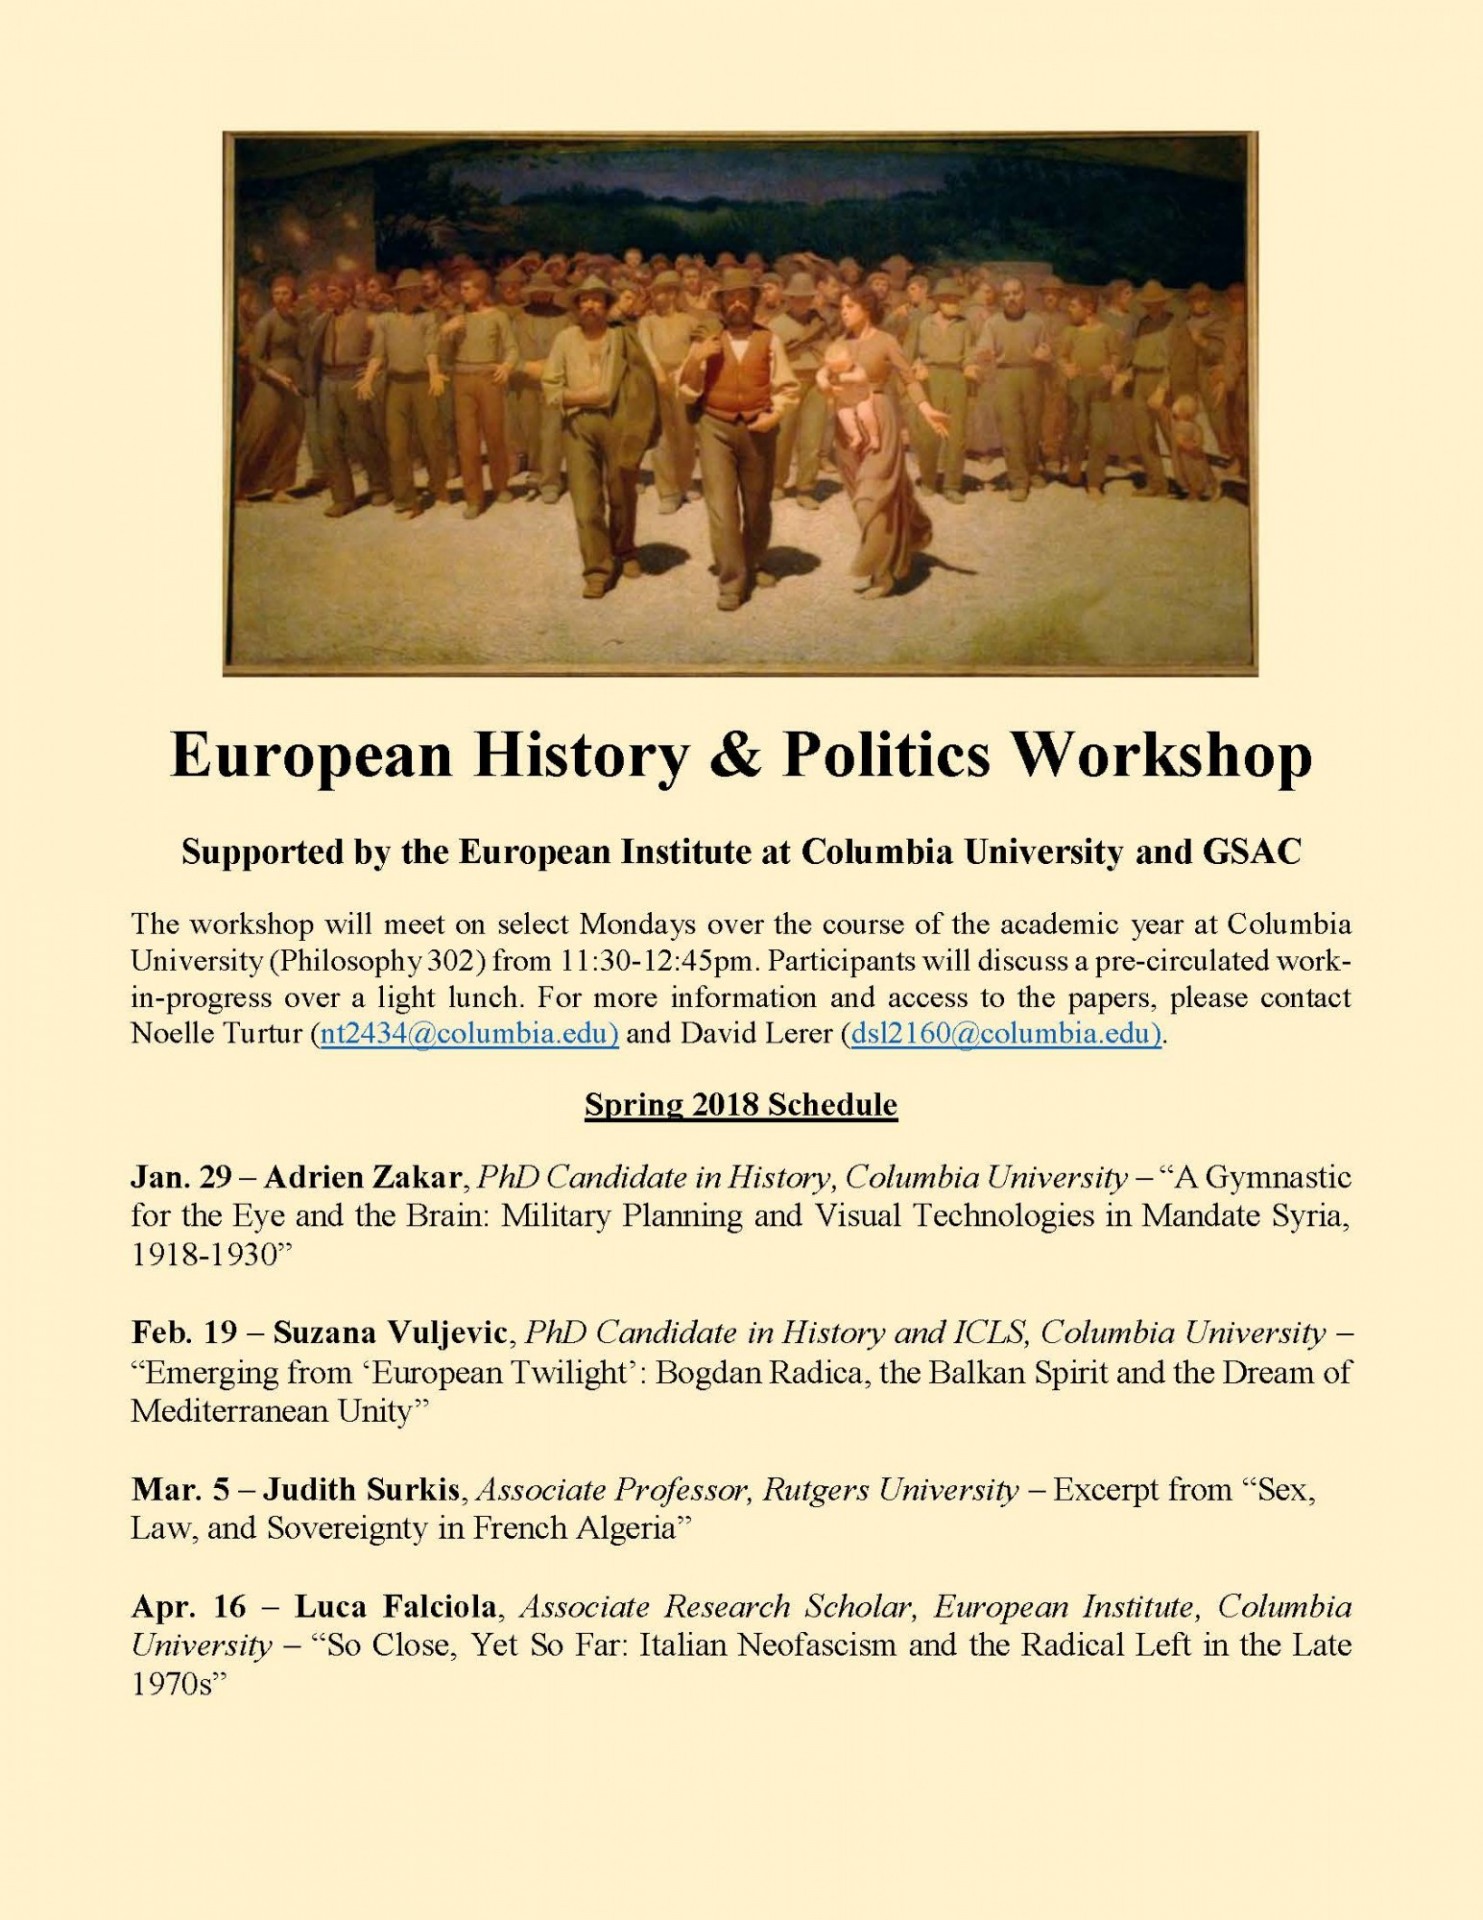 Flyer for European History and Politics Workshop series, with text details about the events